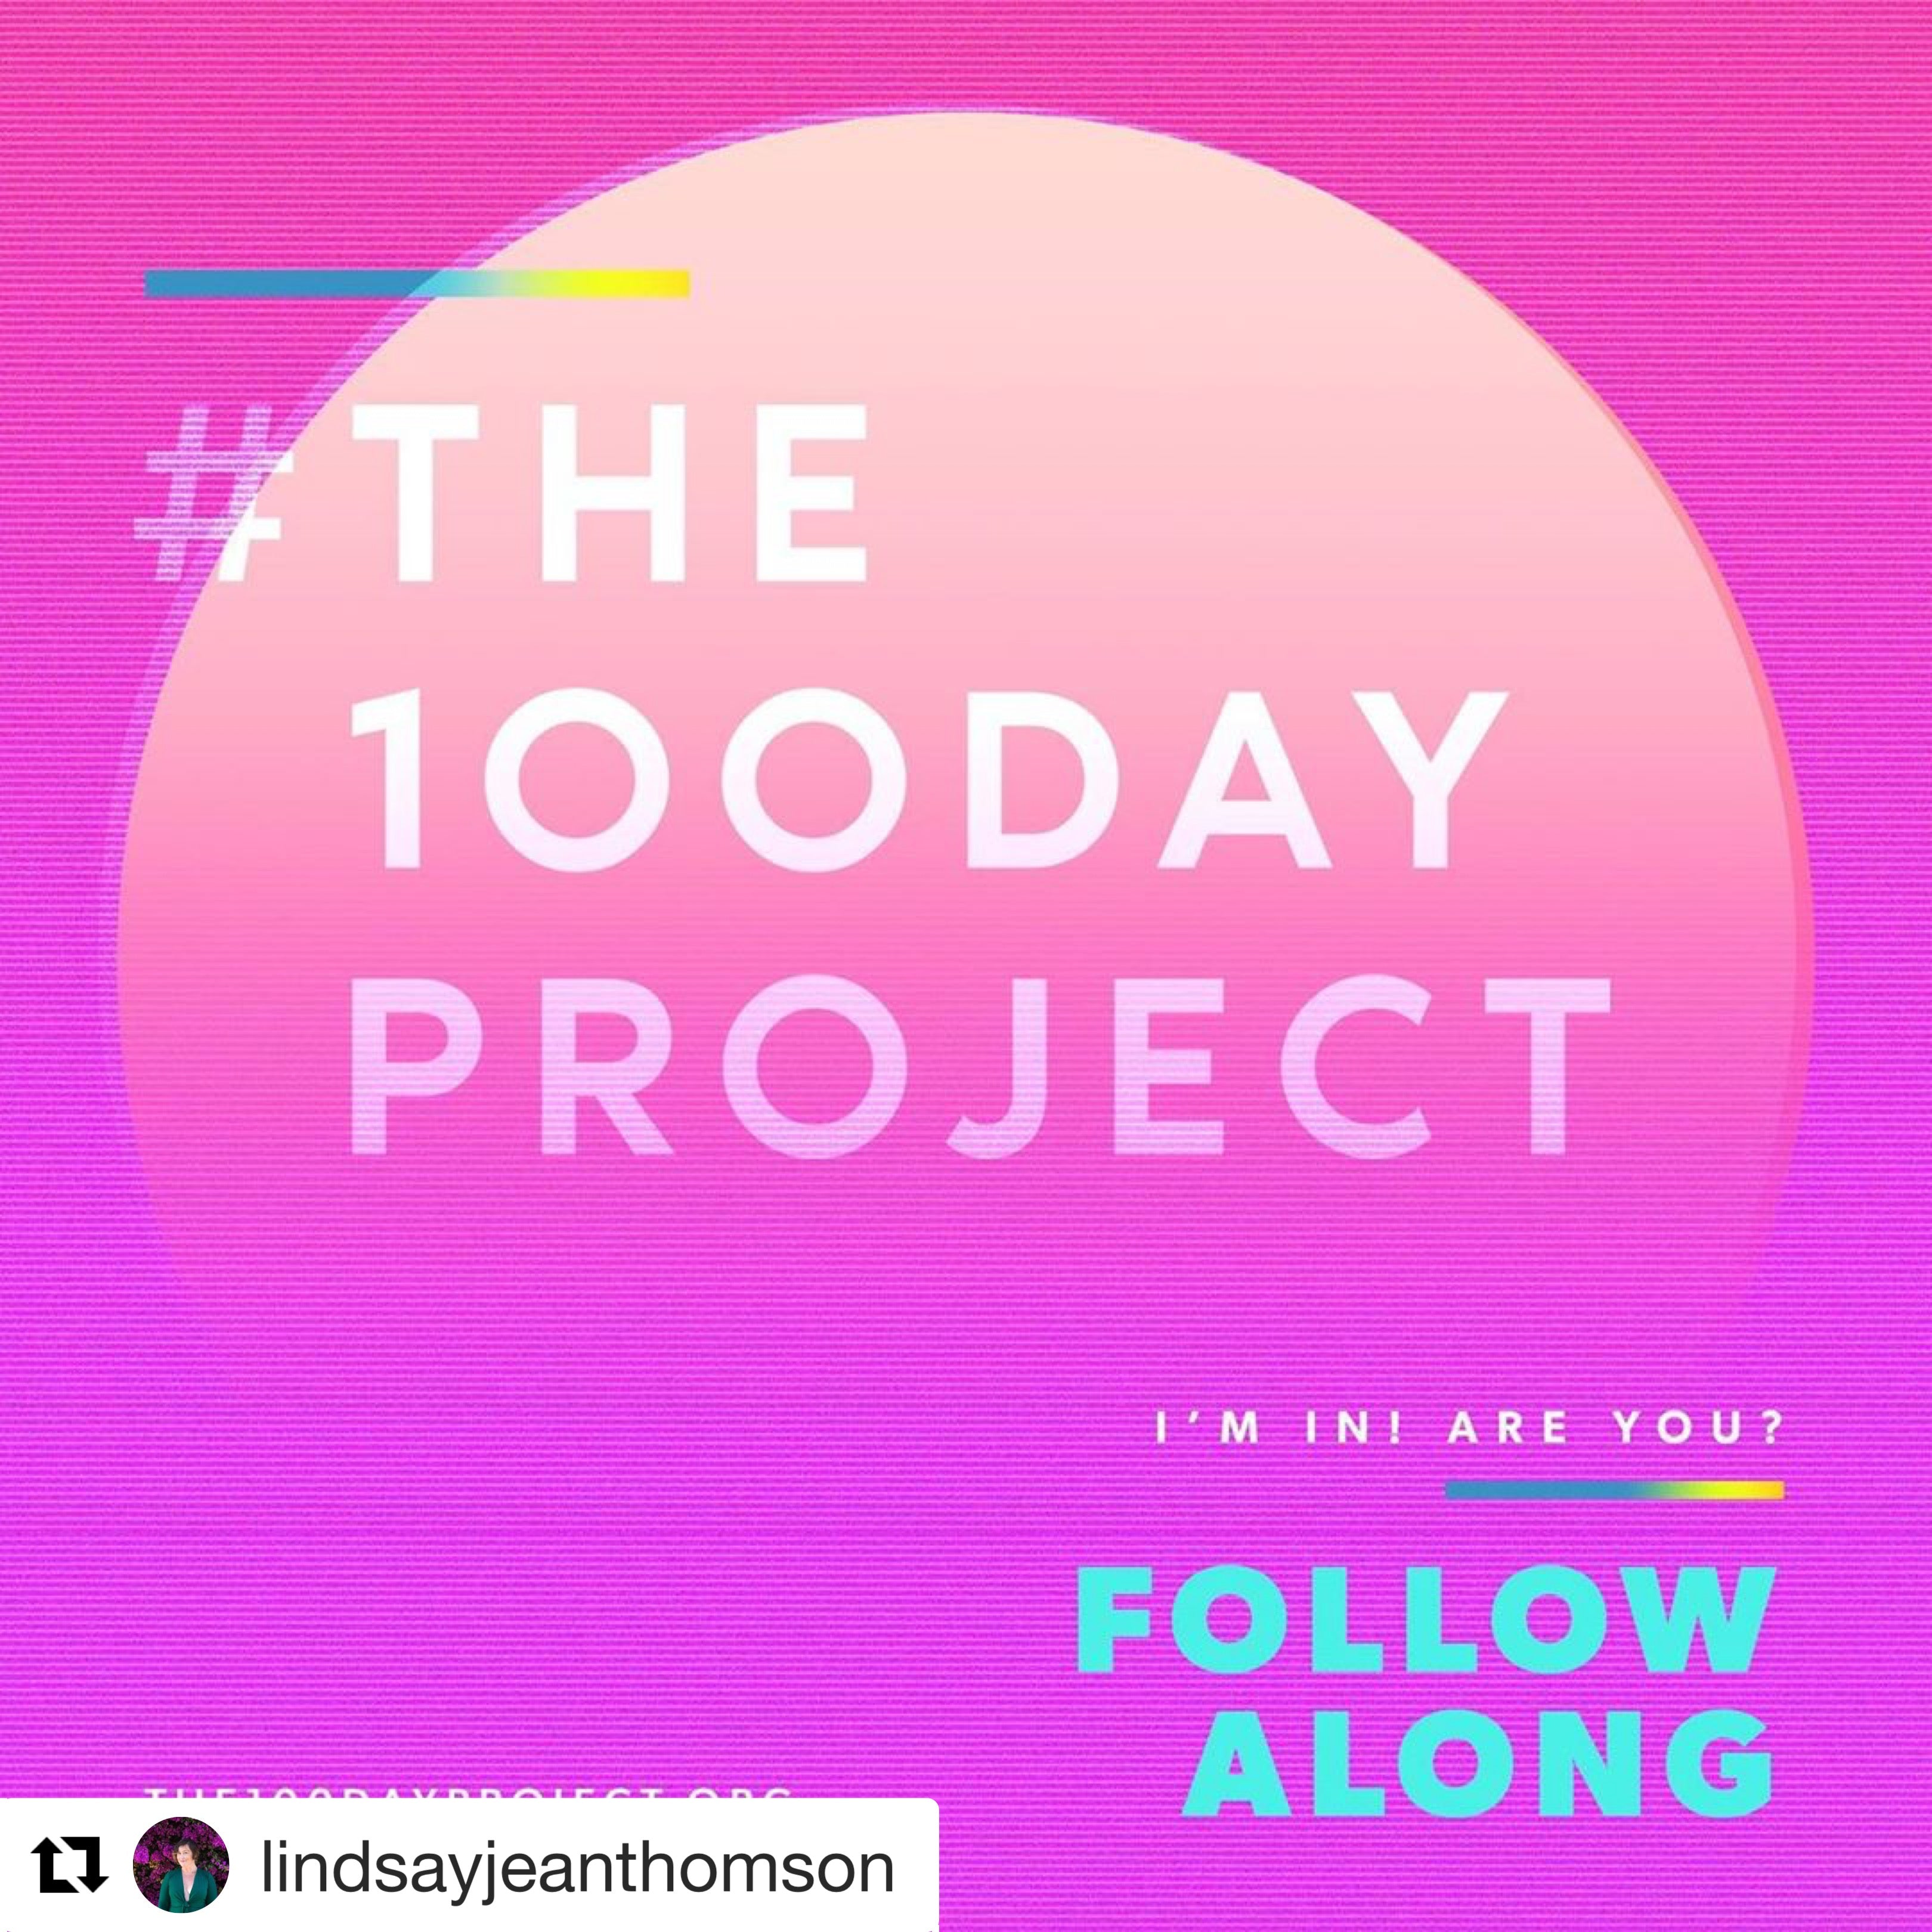 100 day project 